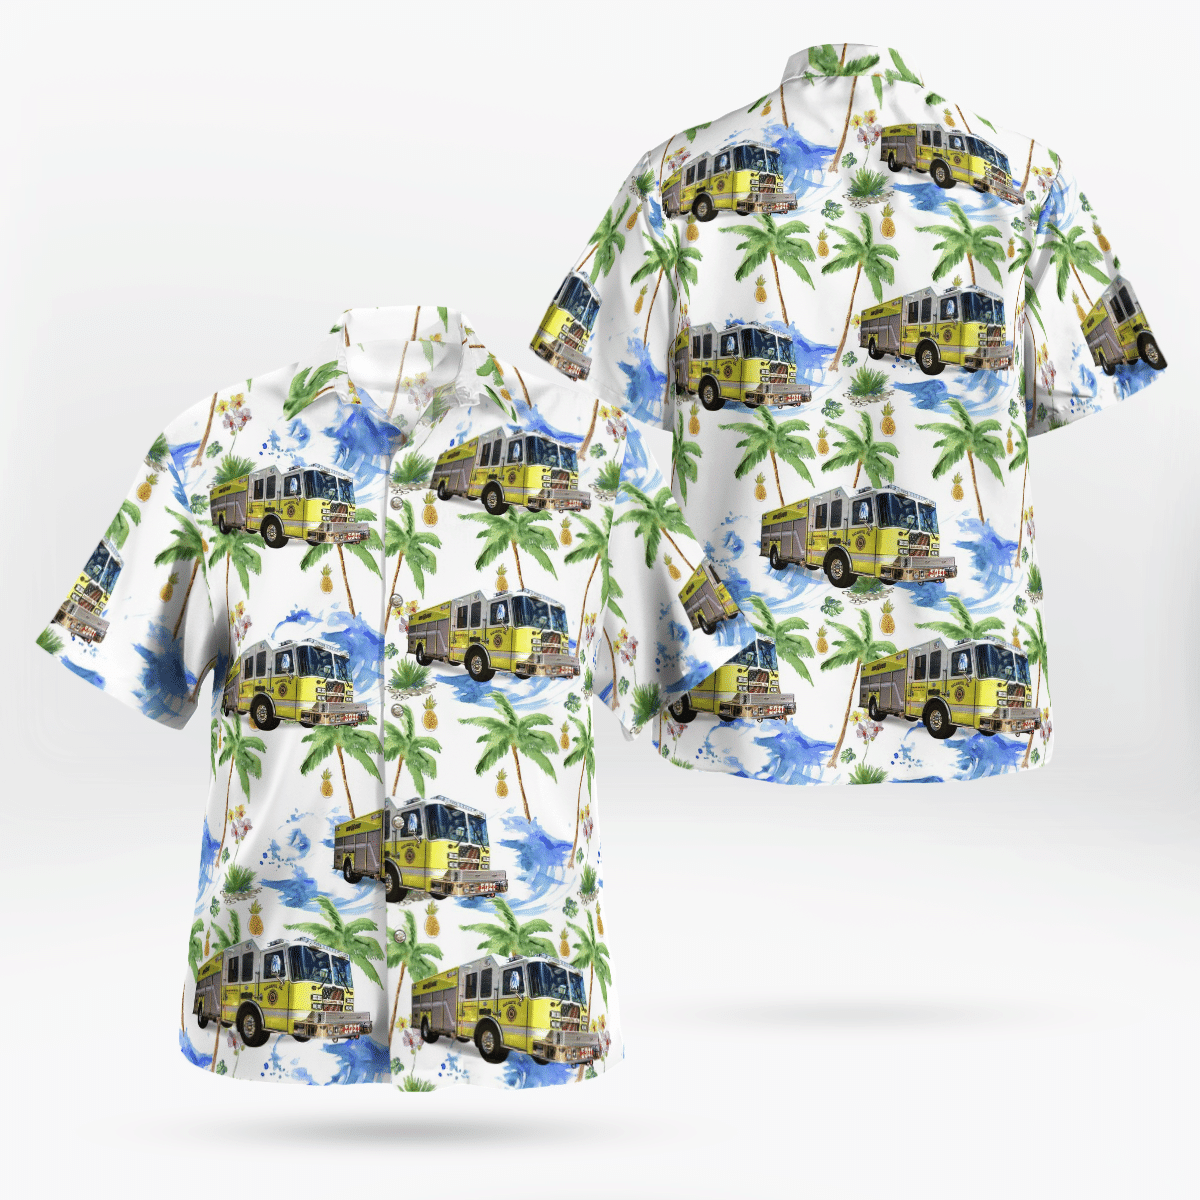 If you are in need of a new summertime look, pick up this Hawaiian shirt 230